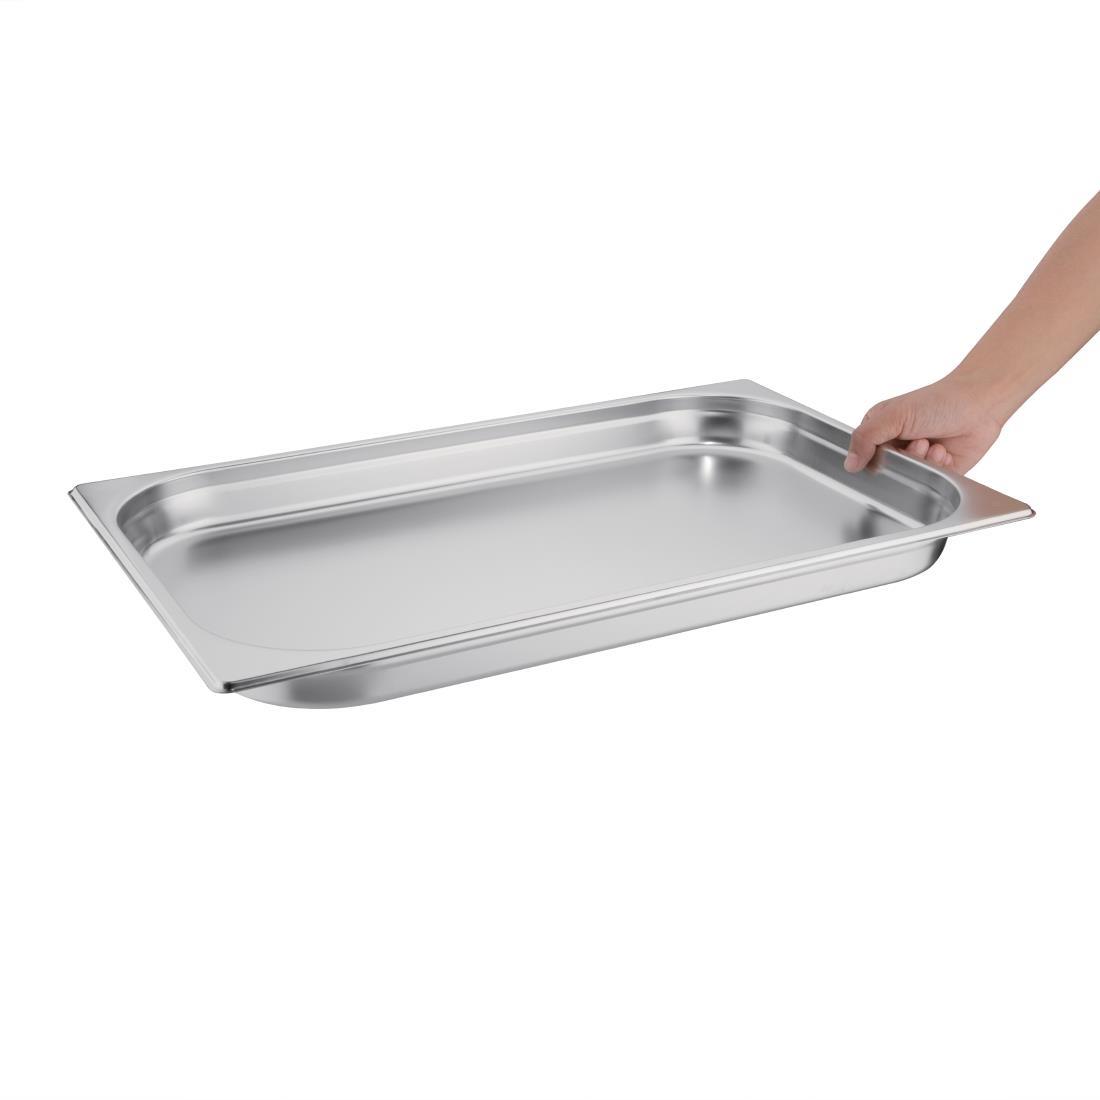 Vogue Stainless Steel 1/1 Gastronorm Pan 40mm - K994  - 5